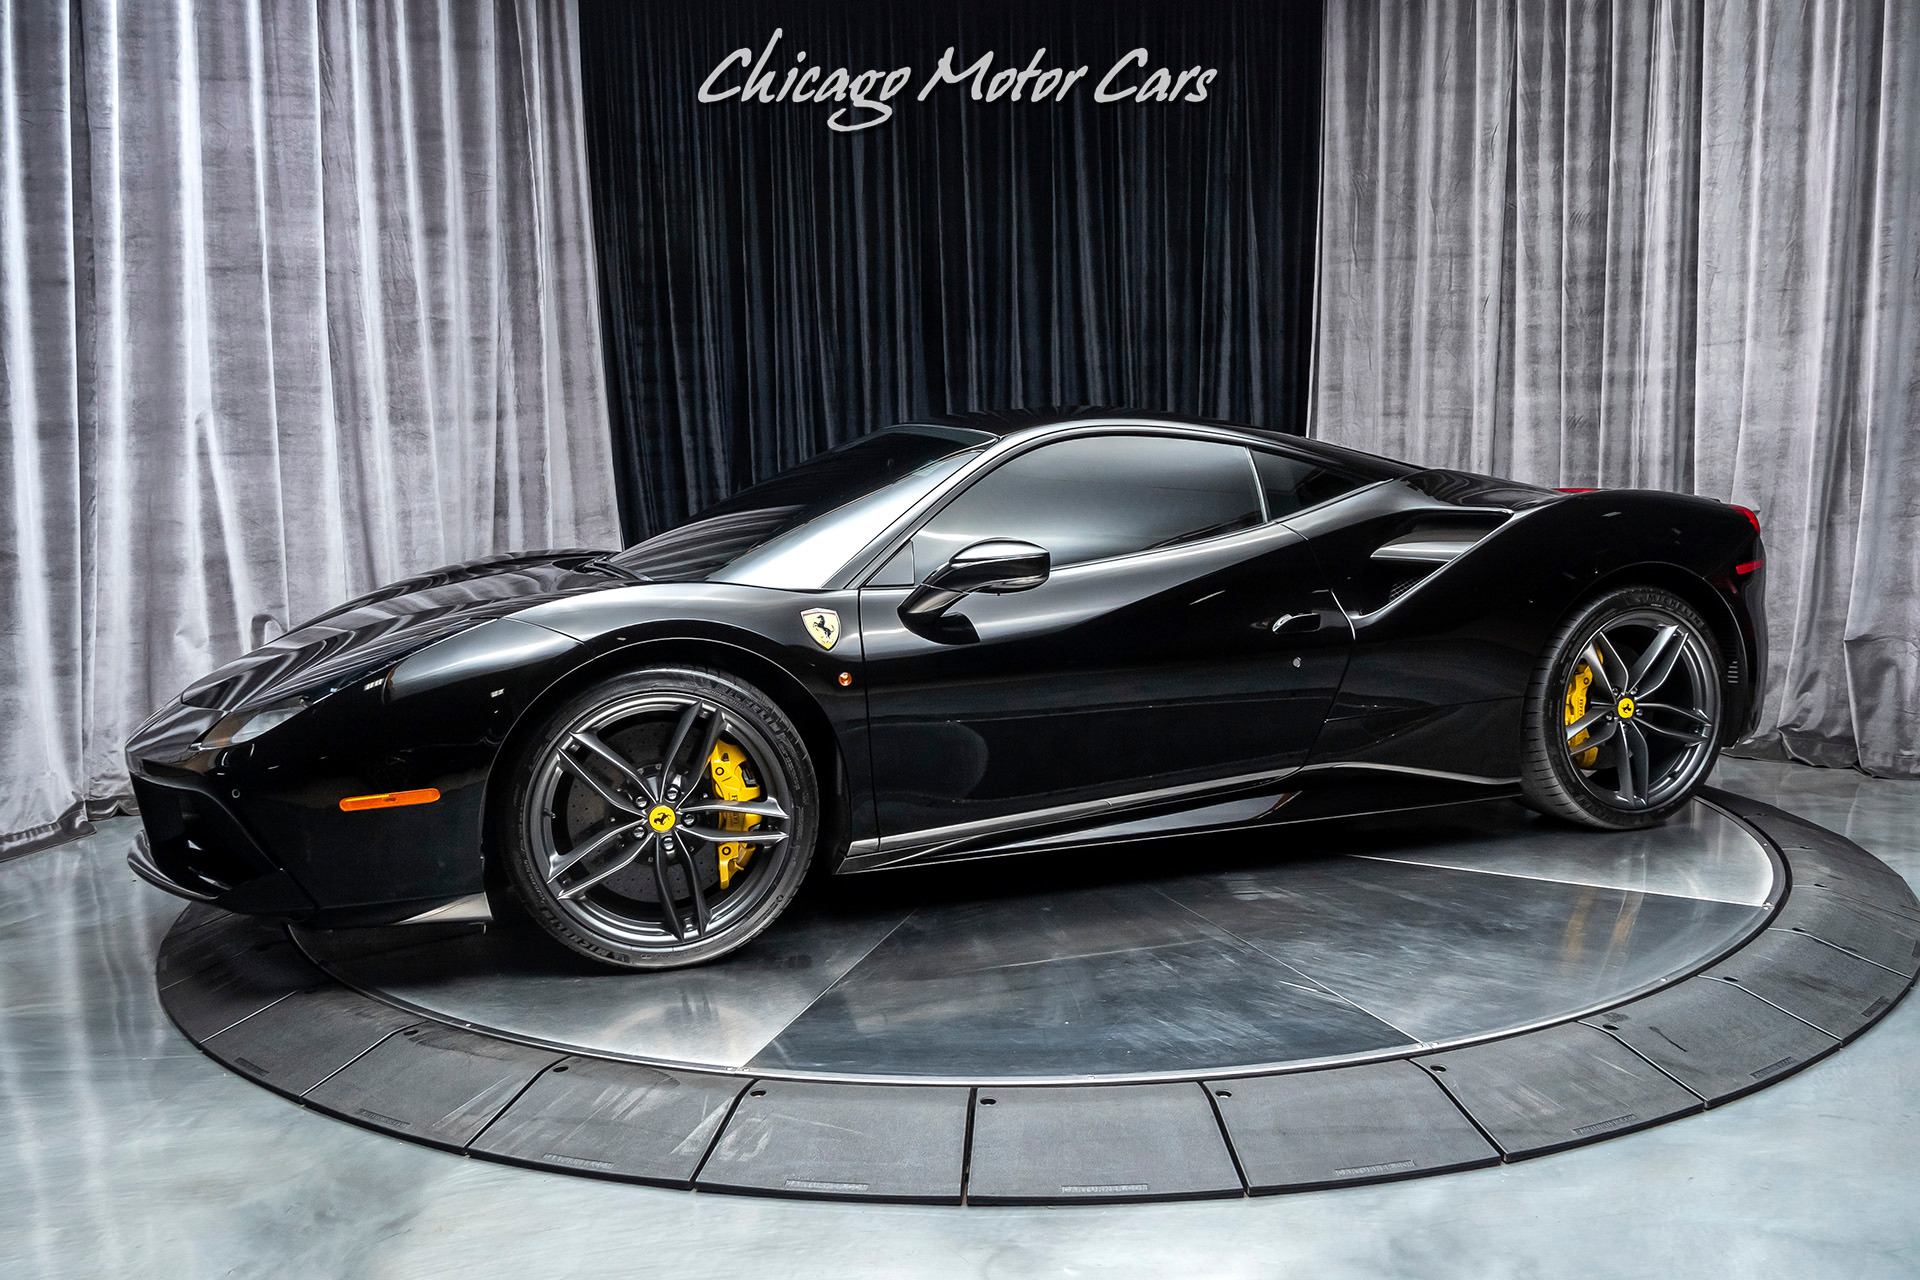 Used-2016-Ferrari-488-GTB-Coupe-ORIGINAL-MSRP-318K-LOADED-WITH-THOUSANDS-FACTORY-OPTIONS